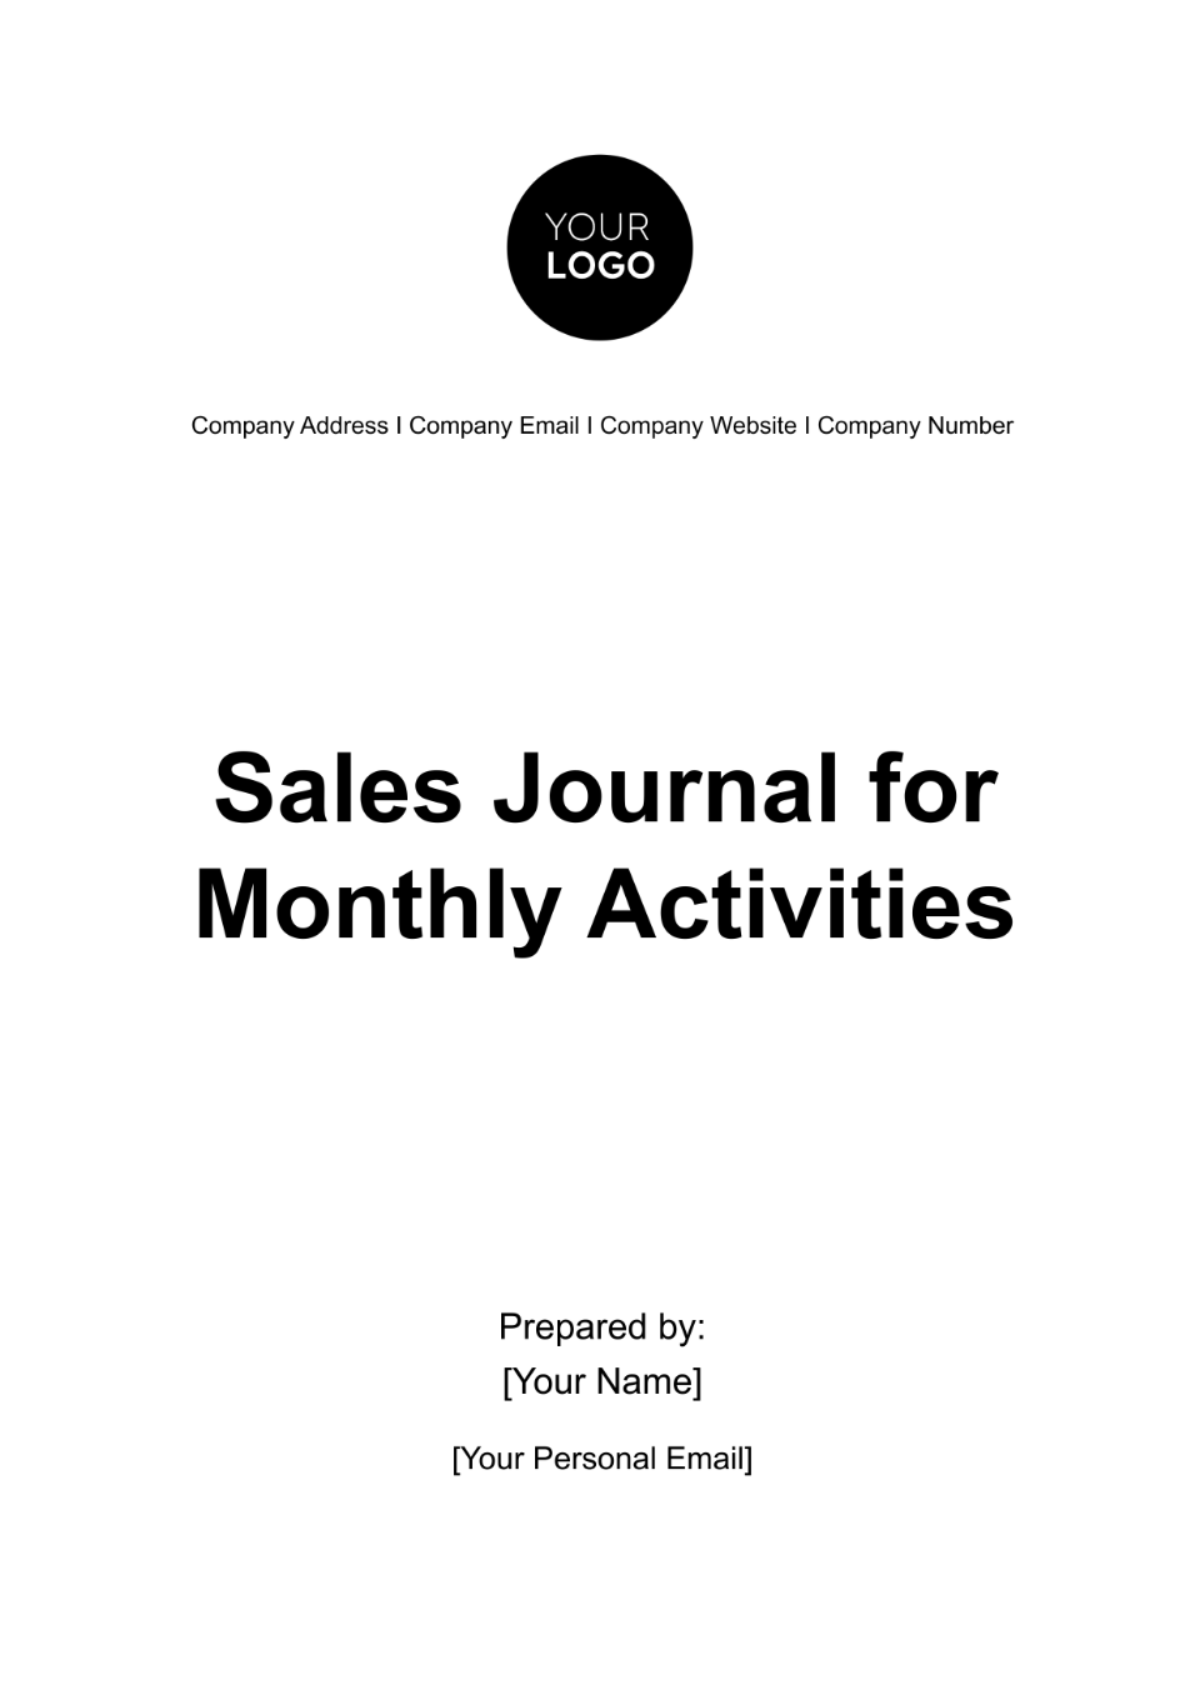 Free Sales Journal for Monthly Activities Template